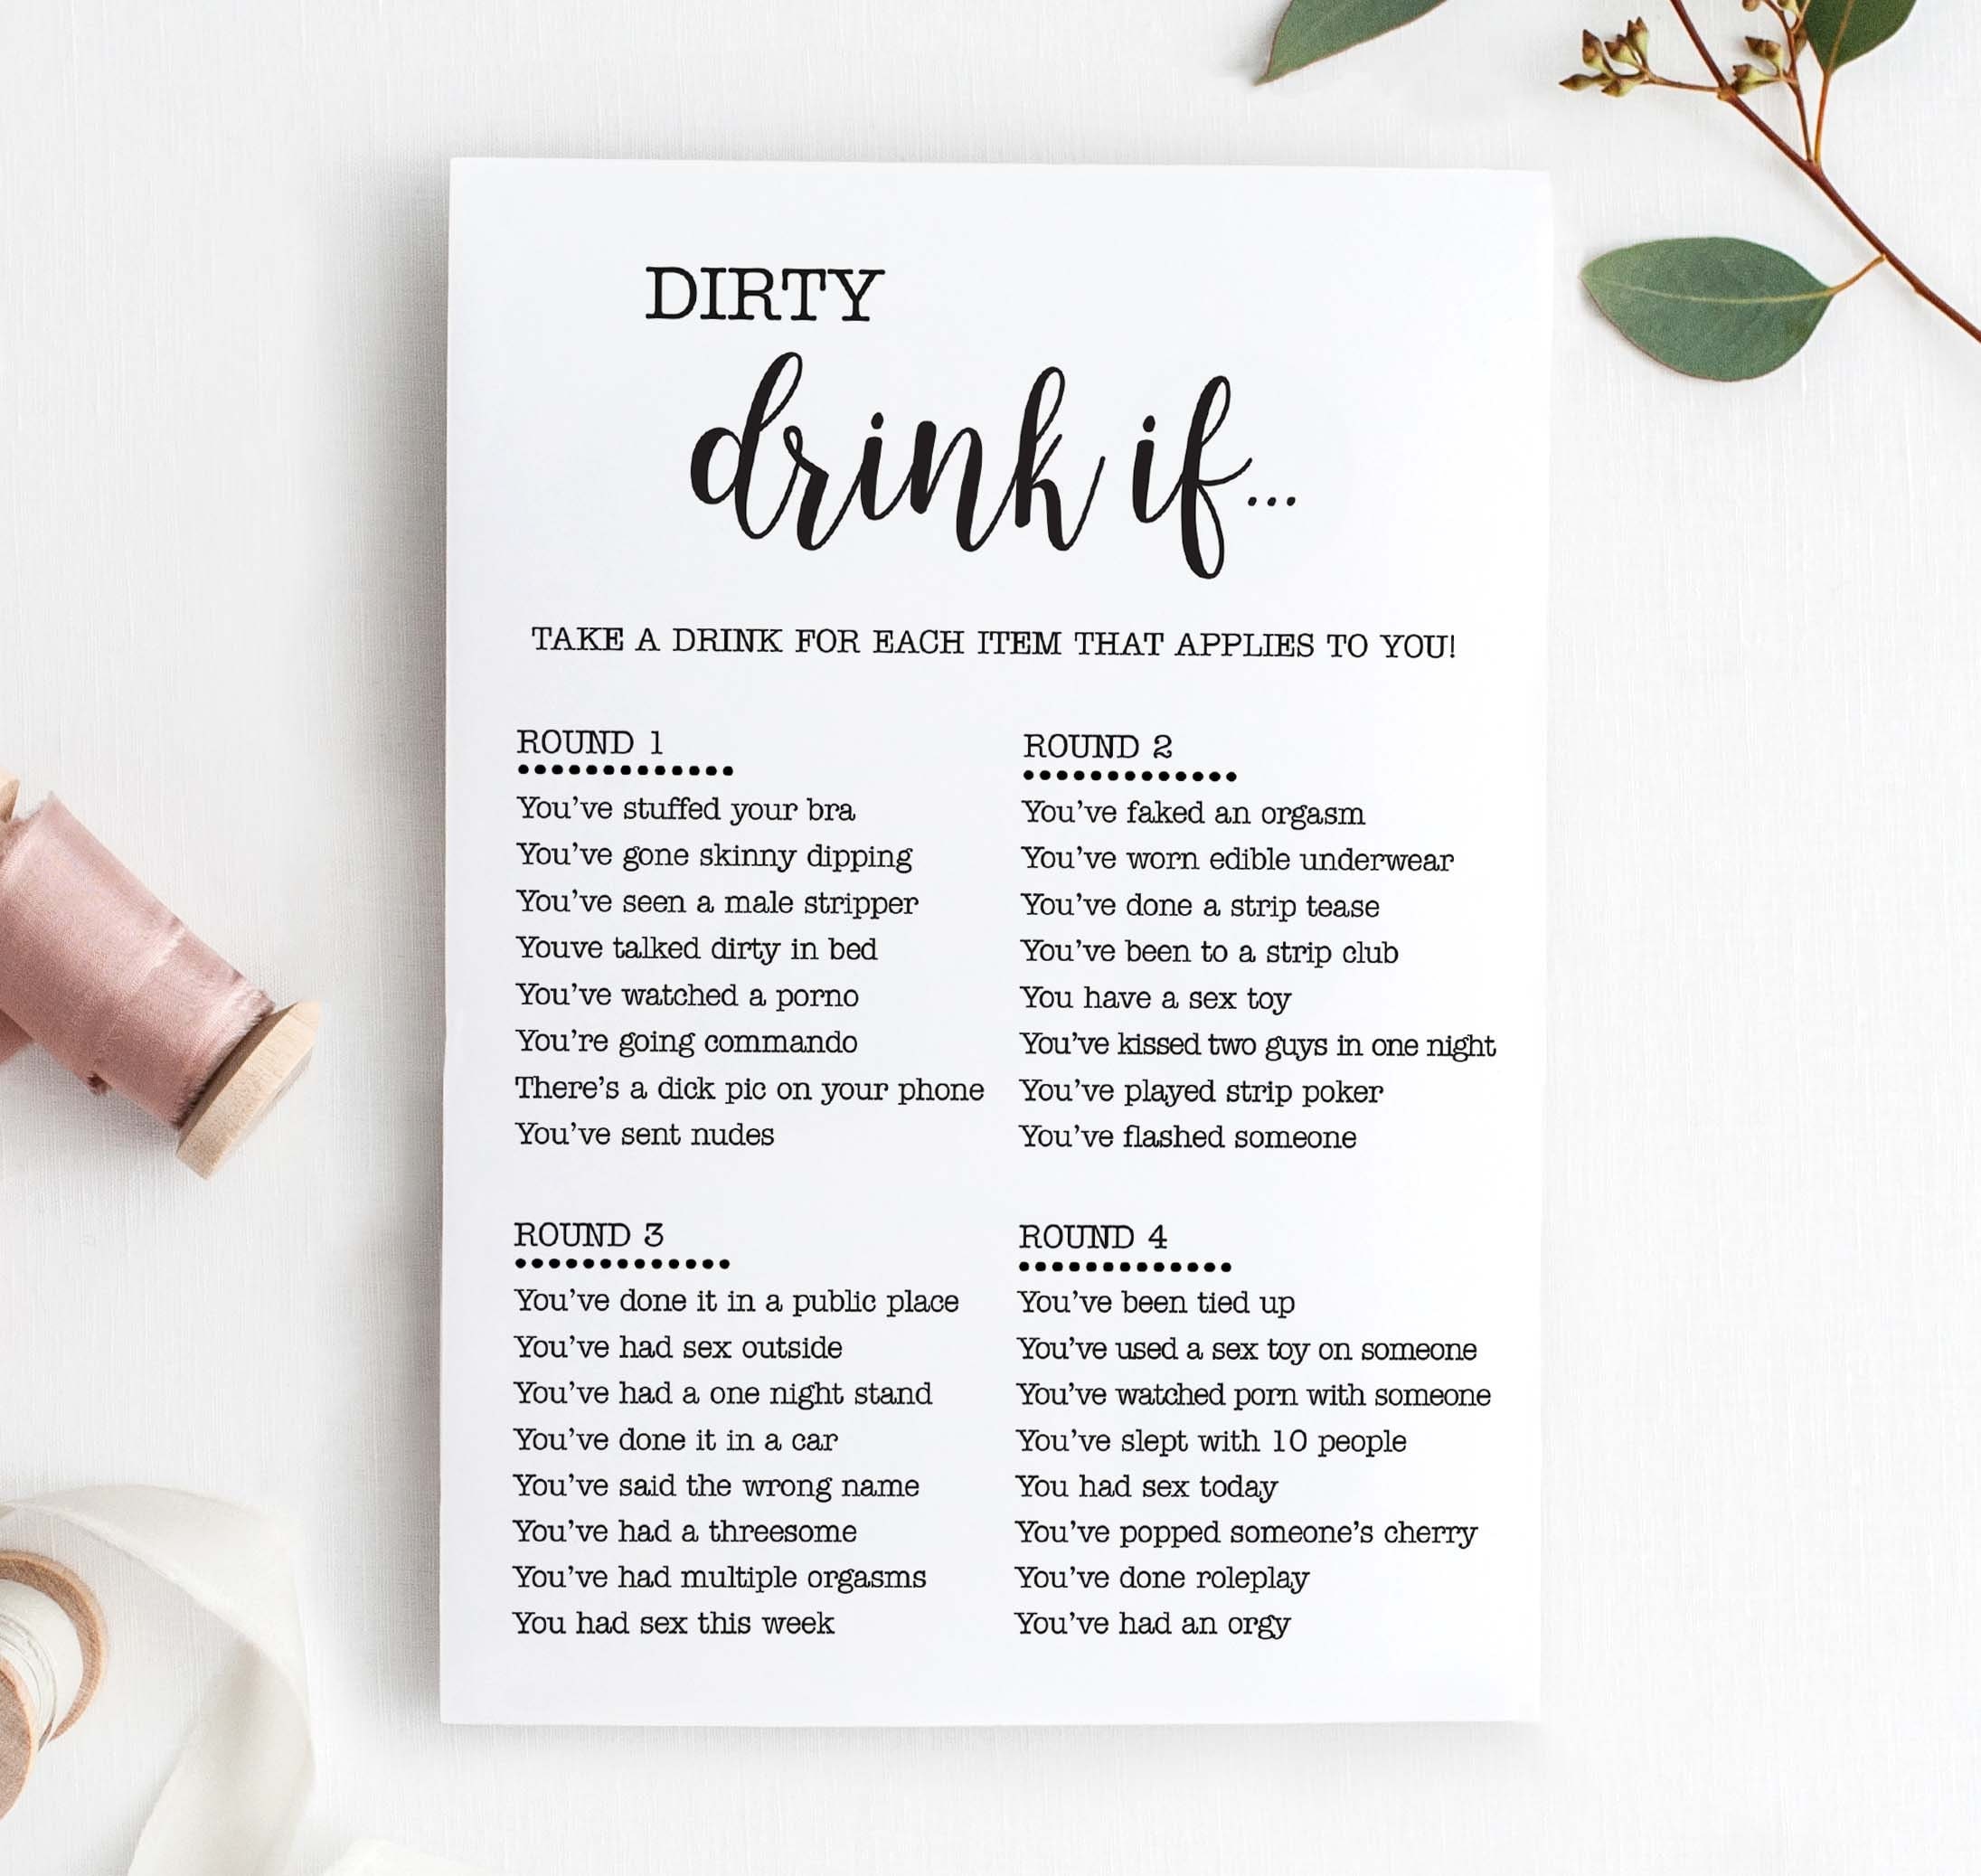 Dirty Drink If PRINTABLE Bachelorette Games Bachelorette image image picture